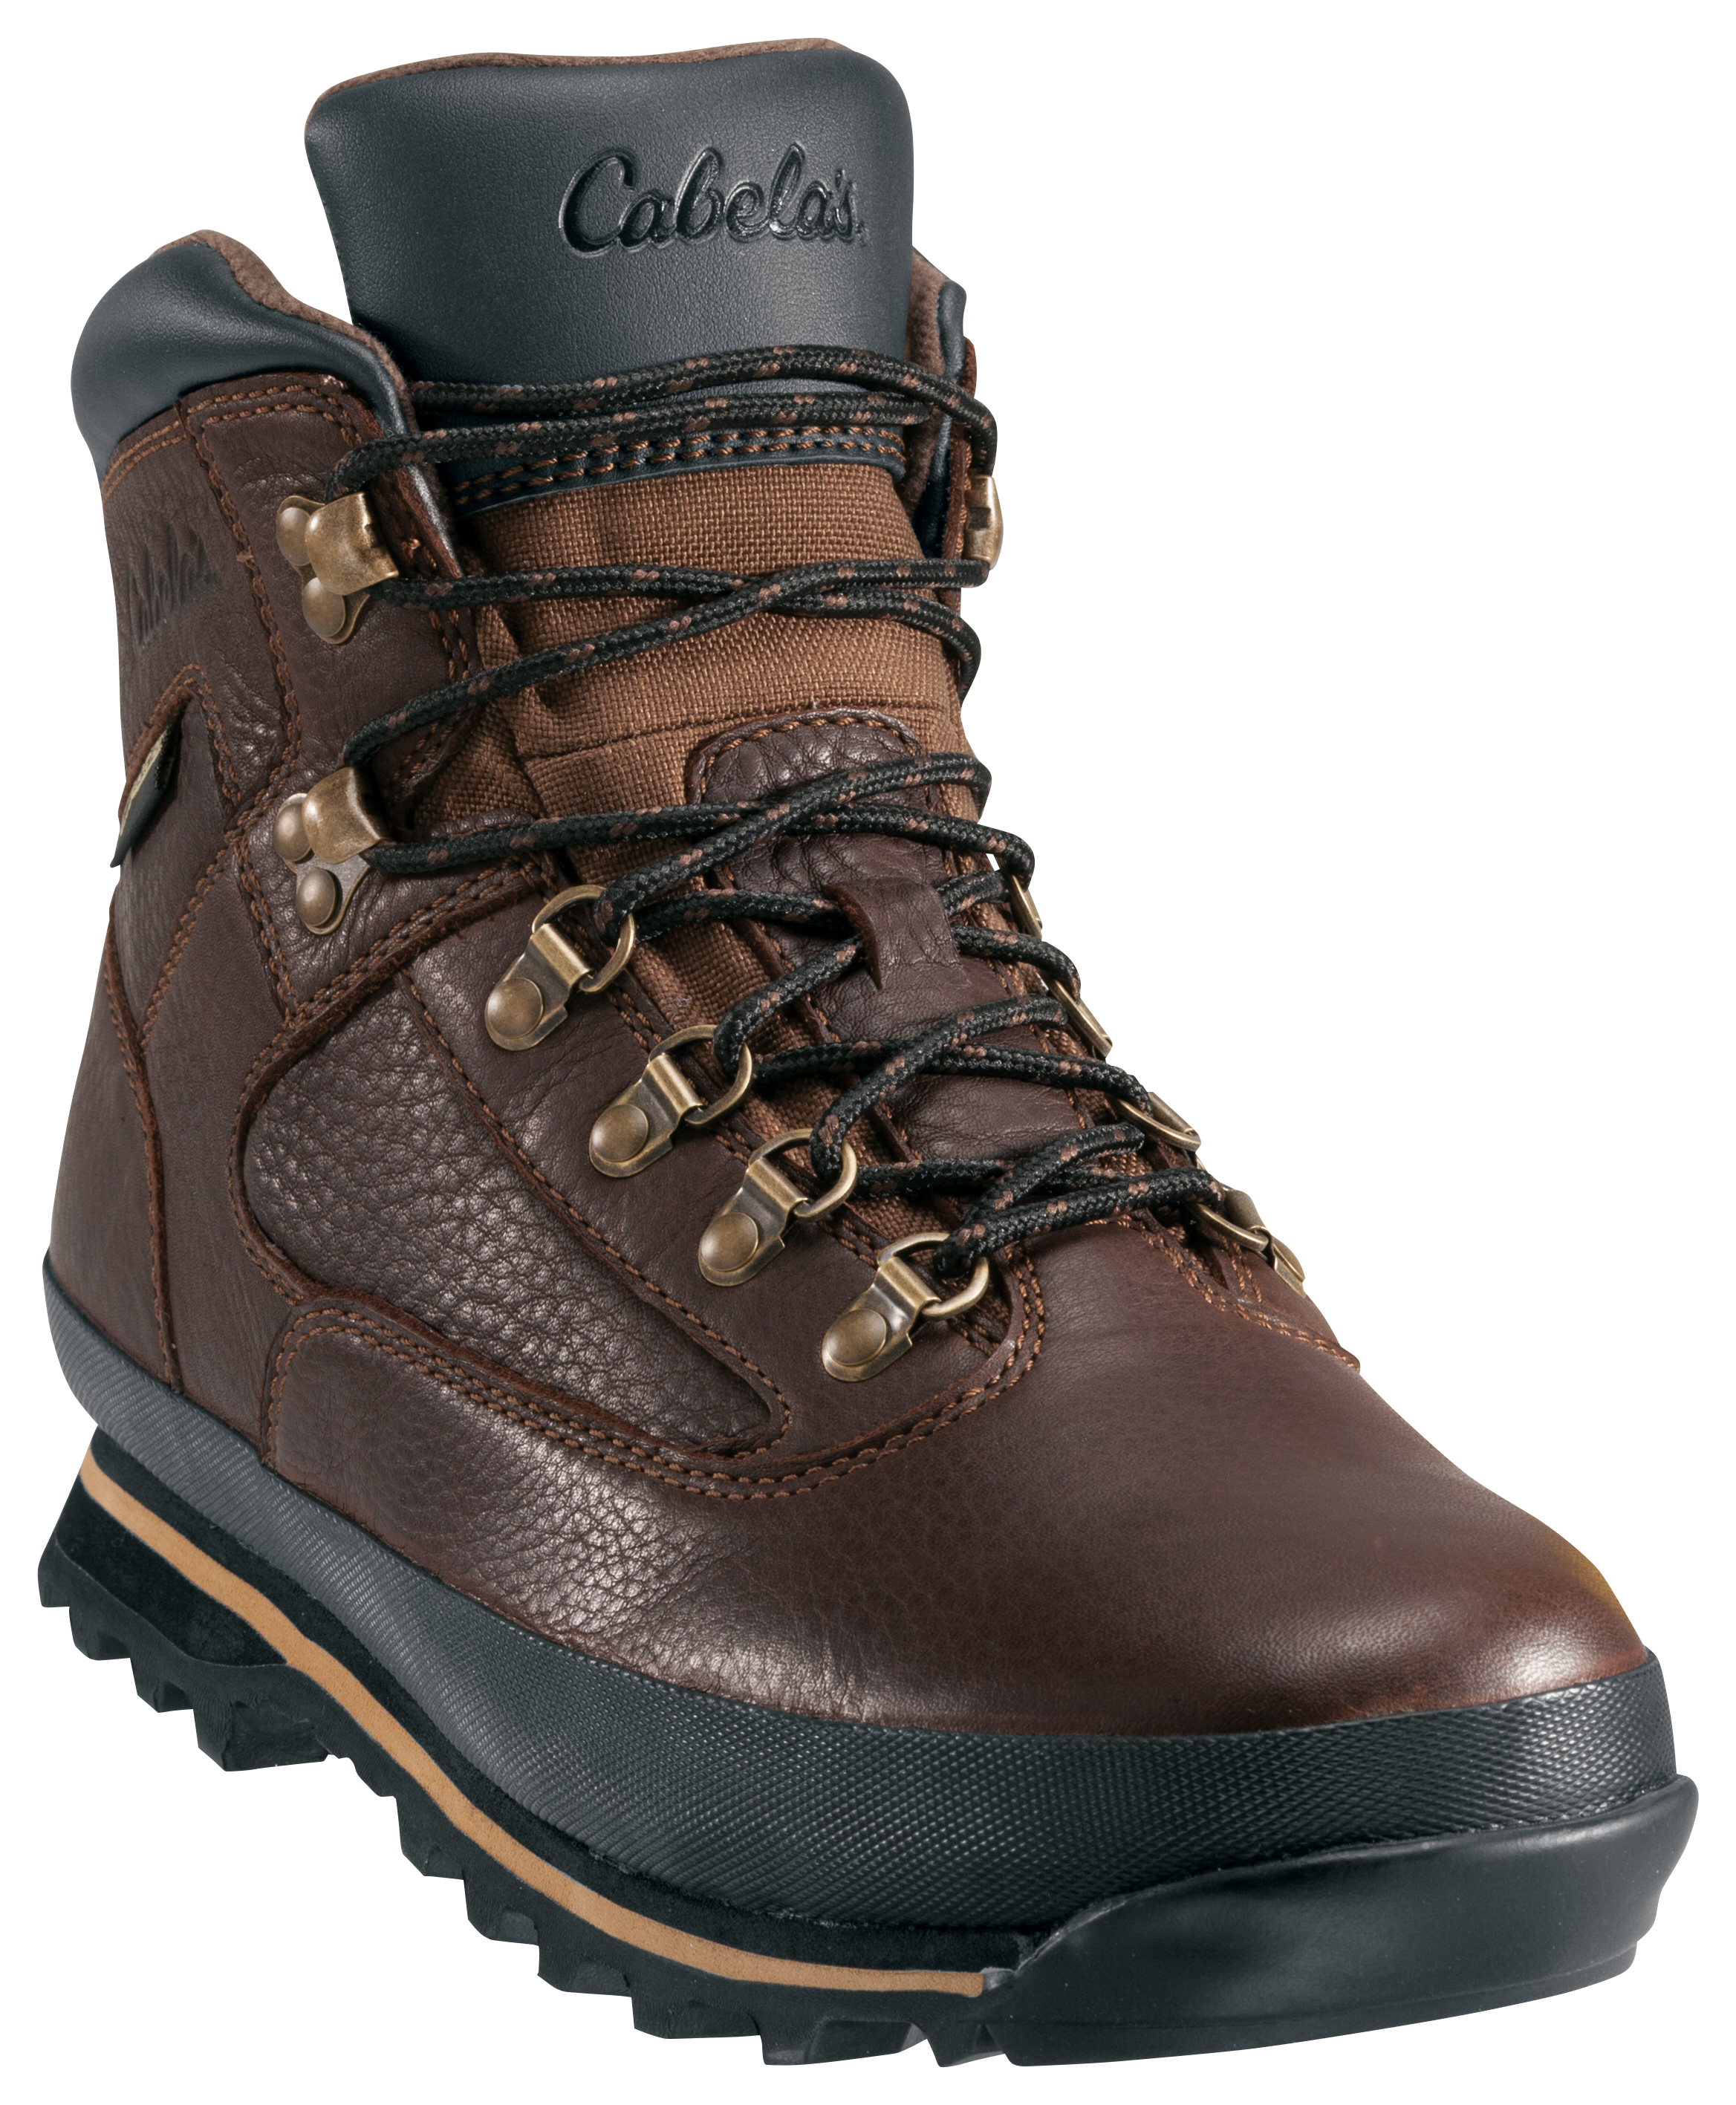 Cabela's Rimrock Mid GORE-TEX Hiking Boots for Men - Brown - 9W